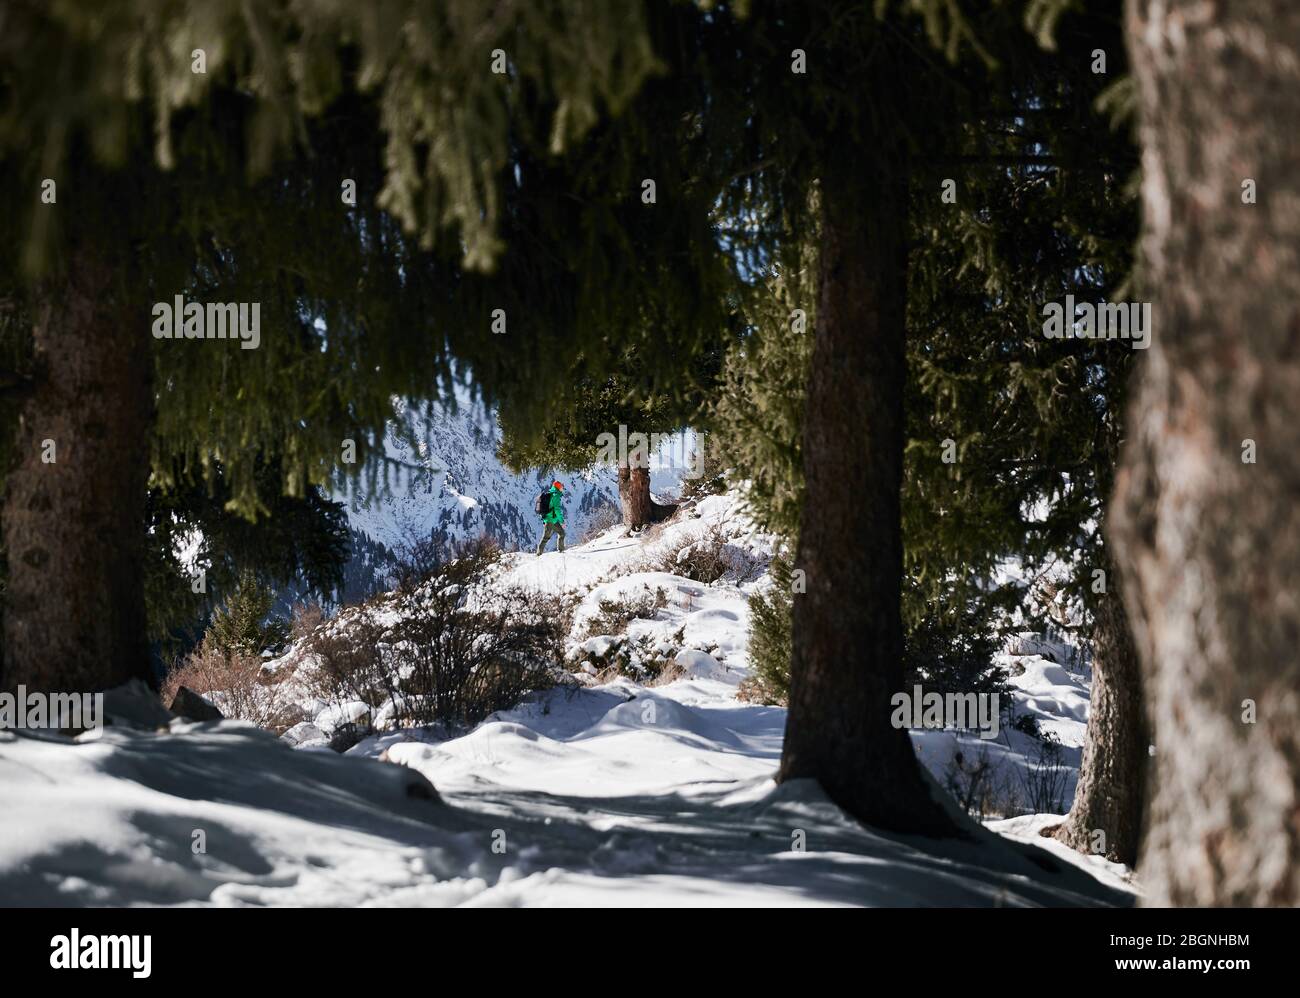 Hiker in green jacket hiking in the forest at snowy mountains background Stock Photo